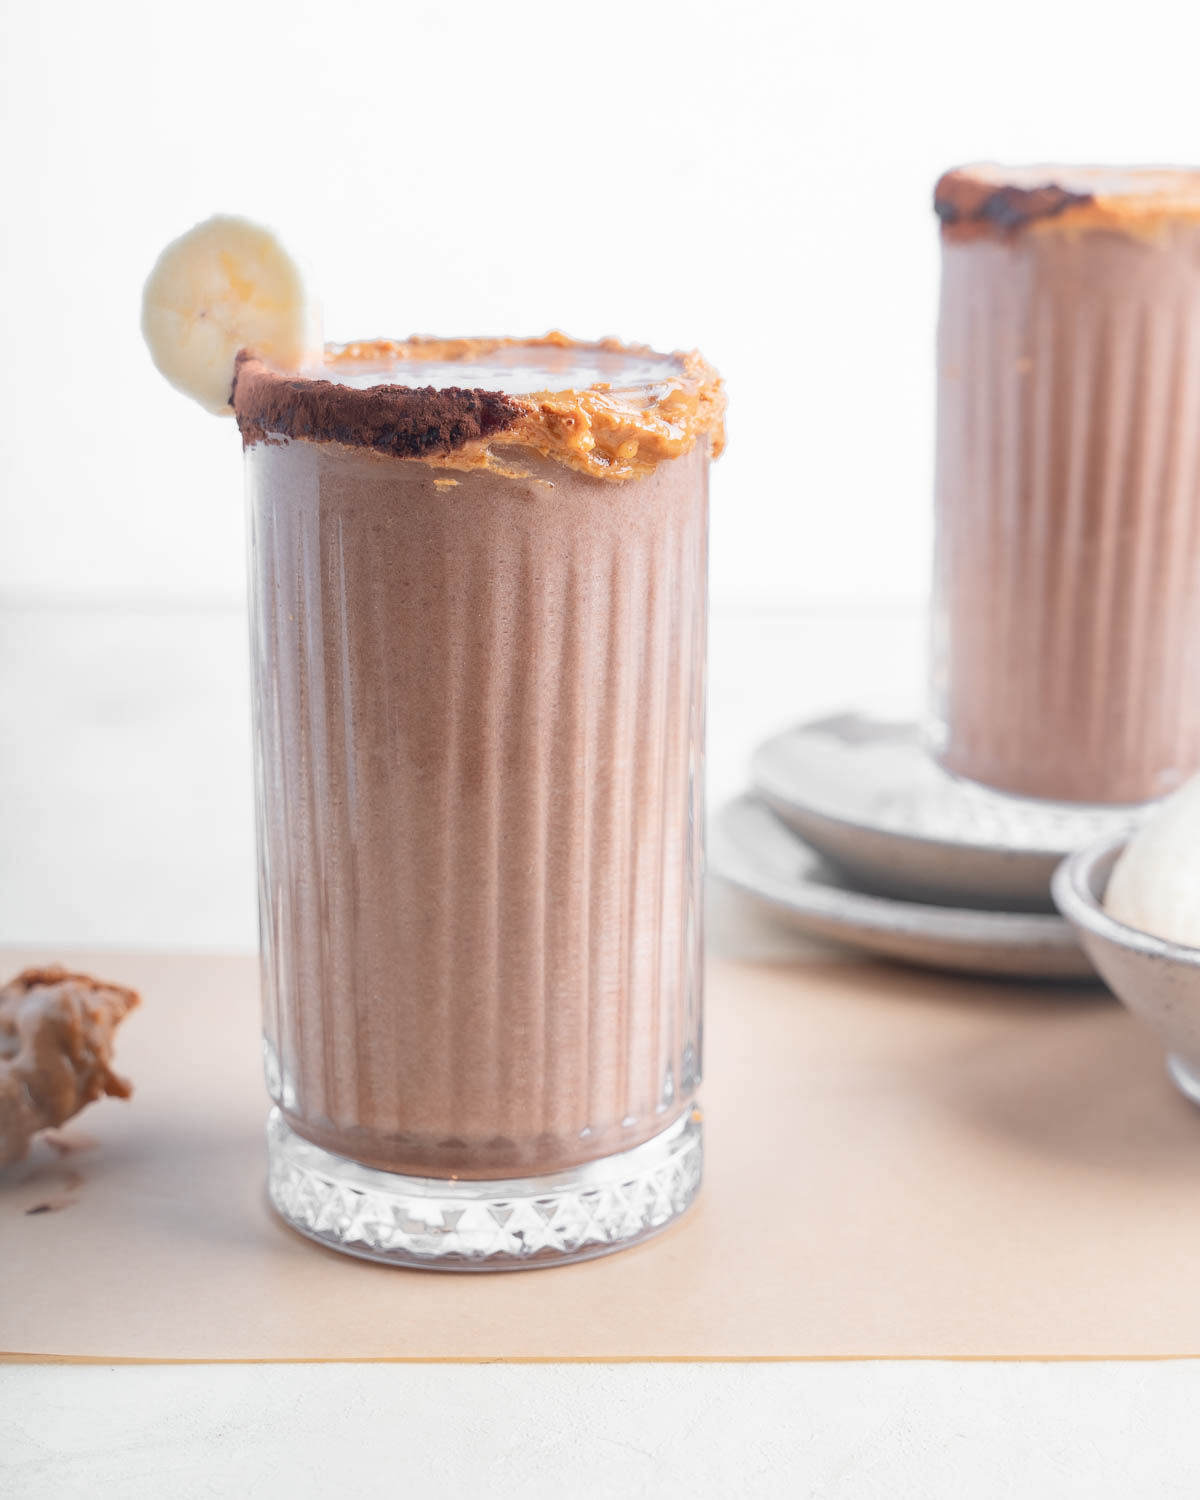 Peanut Butter Cup Tropical Smoothie Cafe Copy Cat straight on shot of the smoothie in a glass with a banana garnish and a peanut butter cocoa powder rim